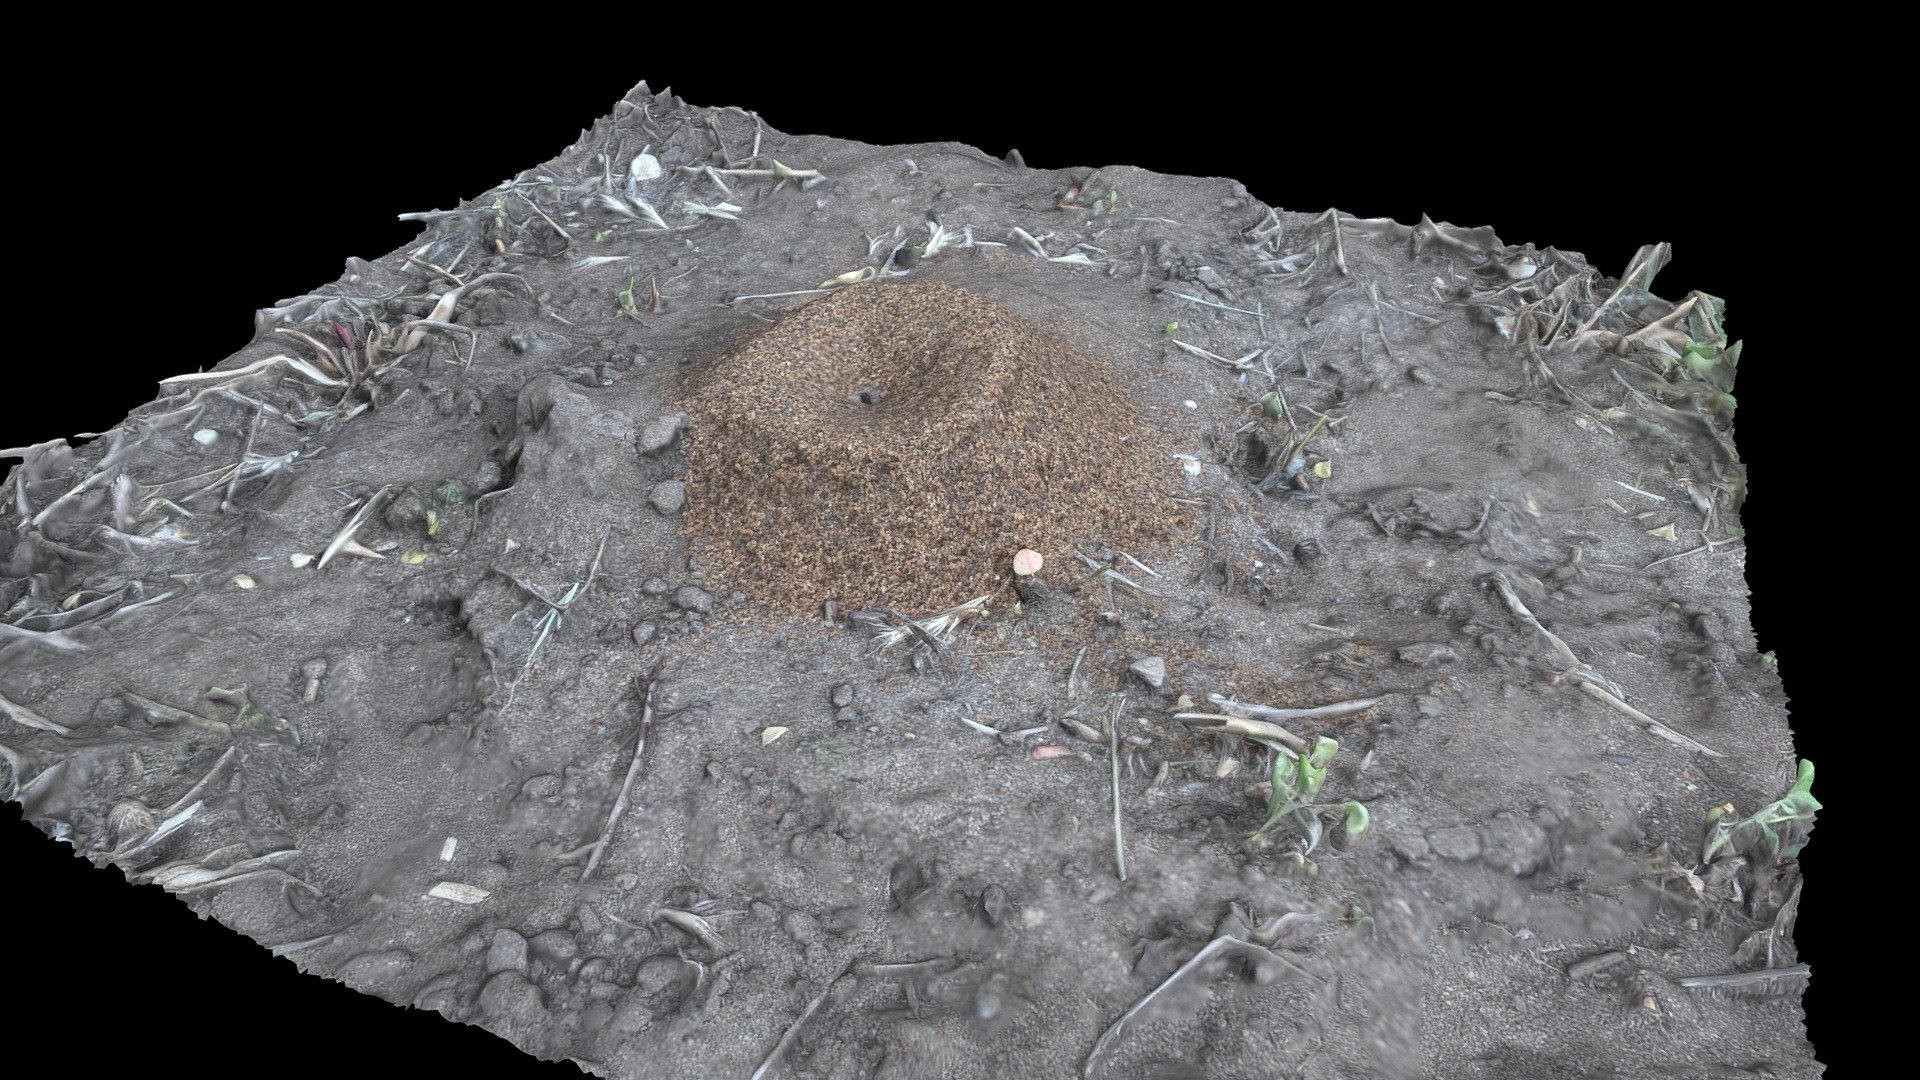 Ant hill near Holmen, Wisconsin.  Unfortunately the ants were going in and out too quickly to capture them in the geometry :)

Created from 77 photographs (Canon EOS Rebel T7i) using Metashape Pro 1.7.0.

Photographed June 10, 2021 - Nature's Engineers: Ants - 3D model by danderson4 3d model